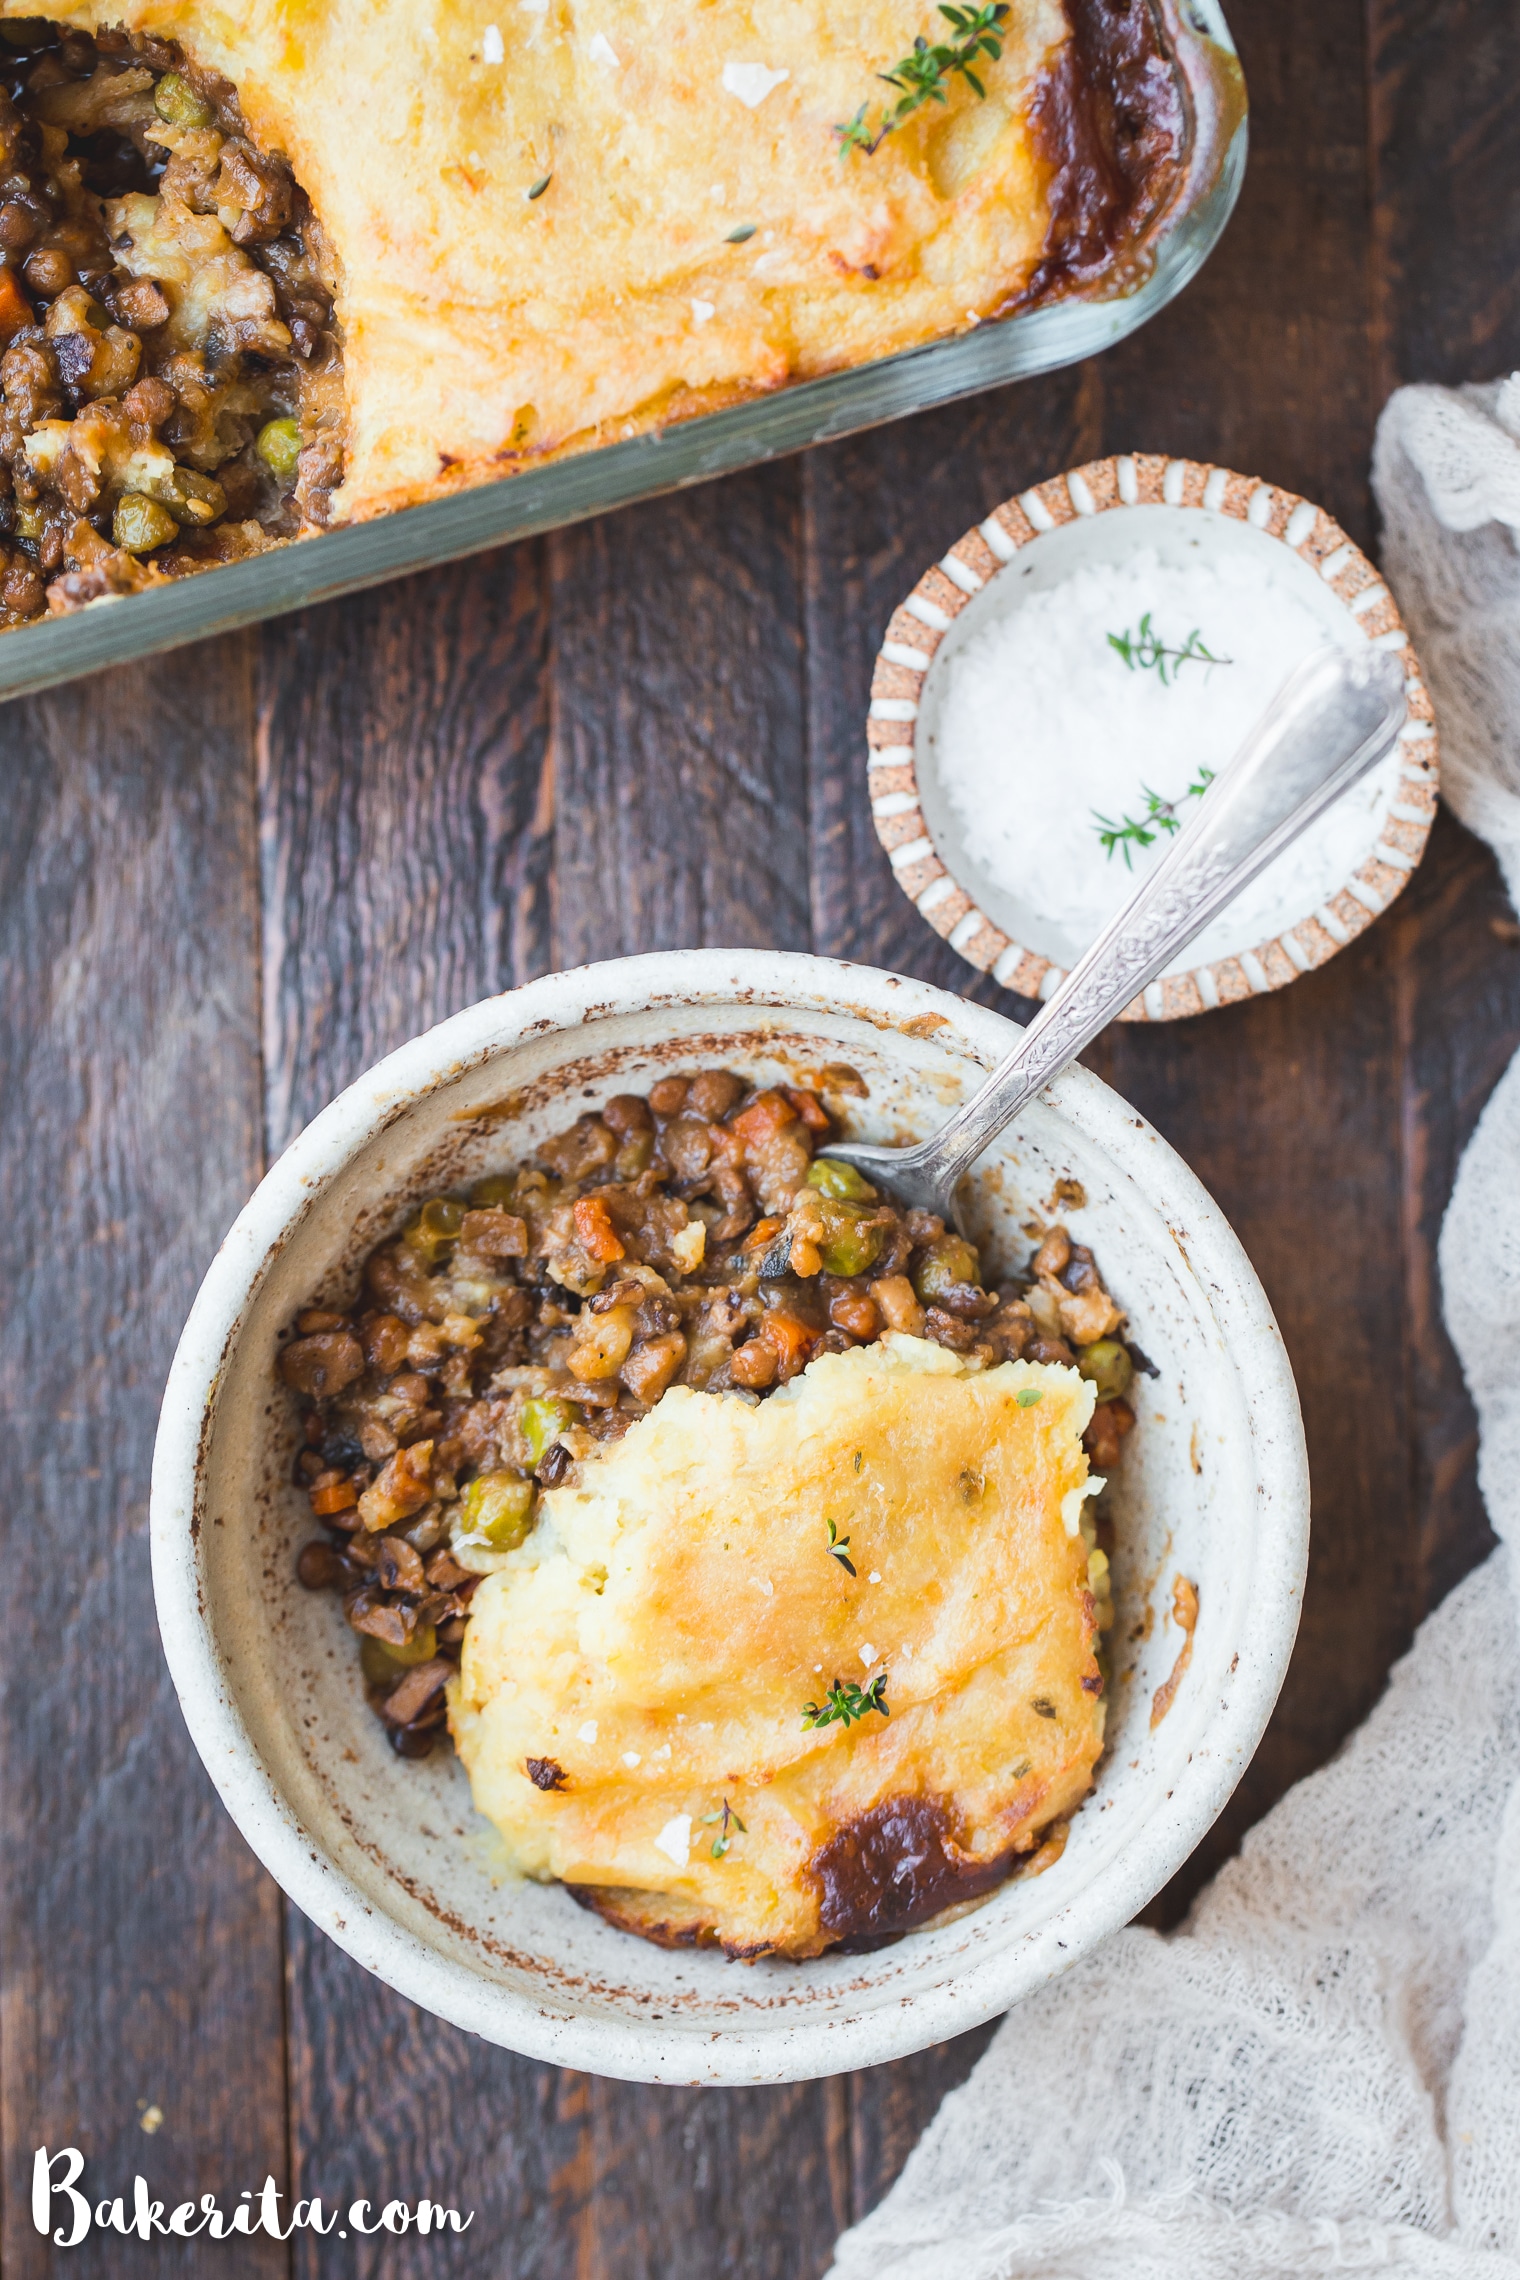 This Vegan Shepherd's Pie is a hearty, comforting dinner that's perfect for chilly nights. Made with lentils for protein, sauteed vegetables, and topped off with creamy mashed potatoes, this is vegan comfort food at it's finest.